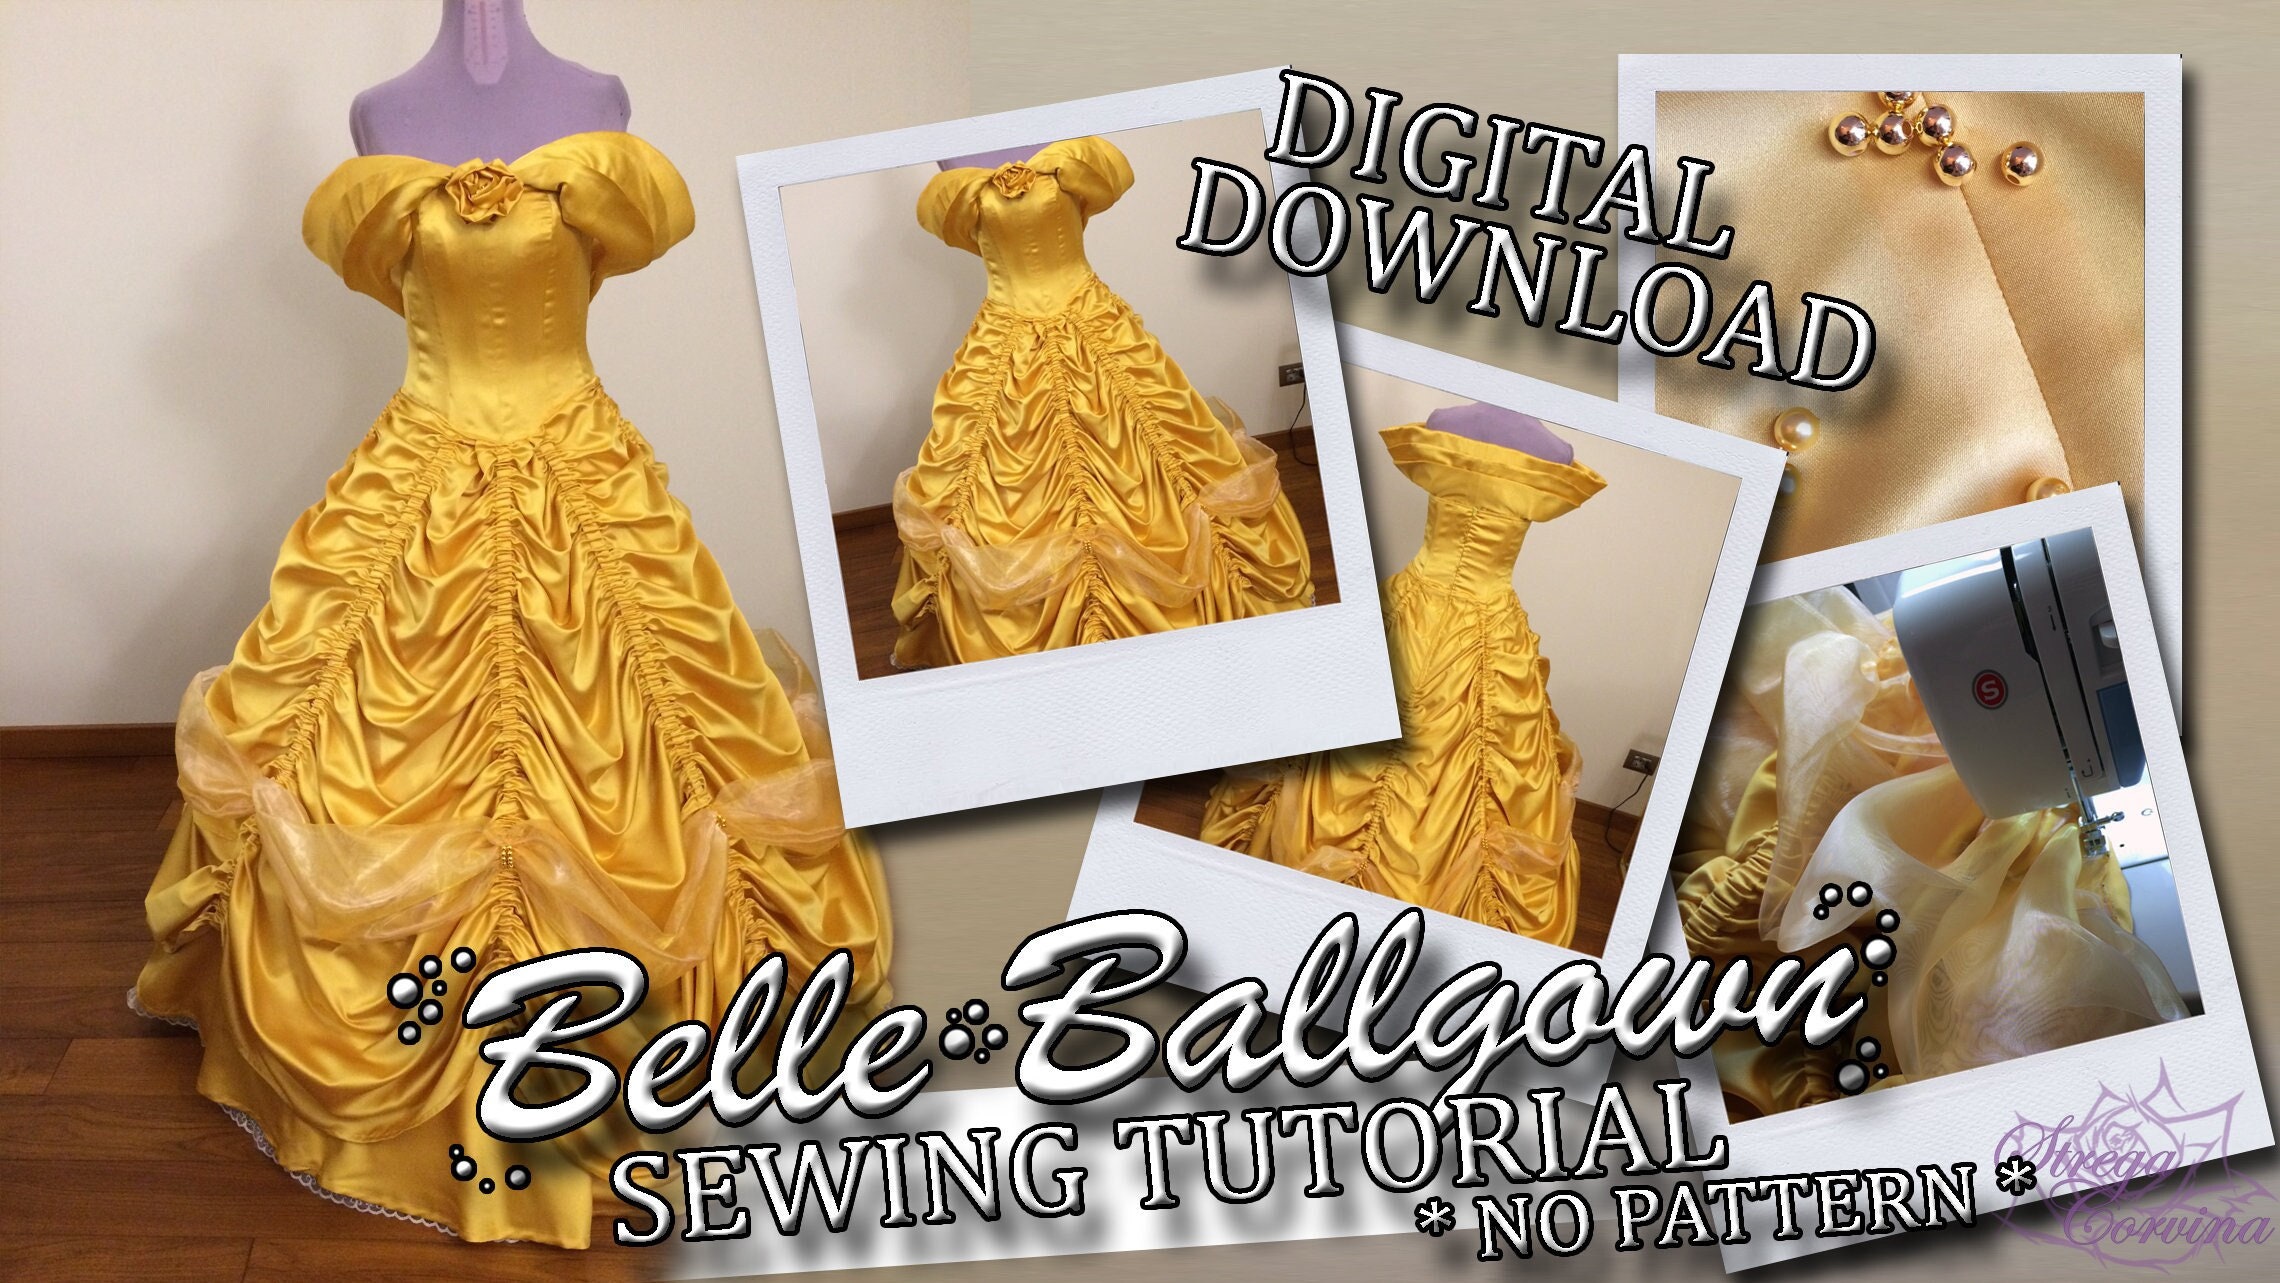 How to sew a Beauty and the Beast inspired costume | Princess Dress Costume  | Frocks & Frolics - YouTube